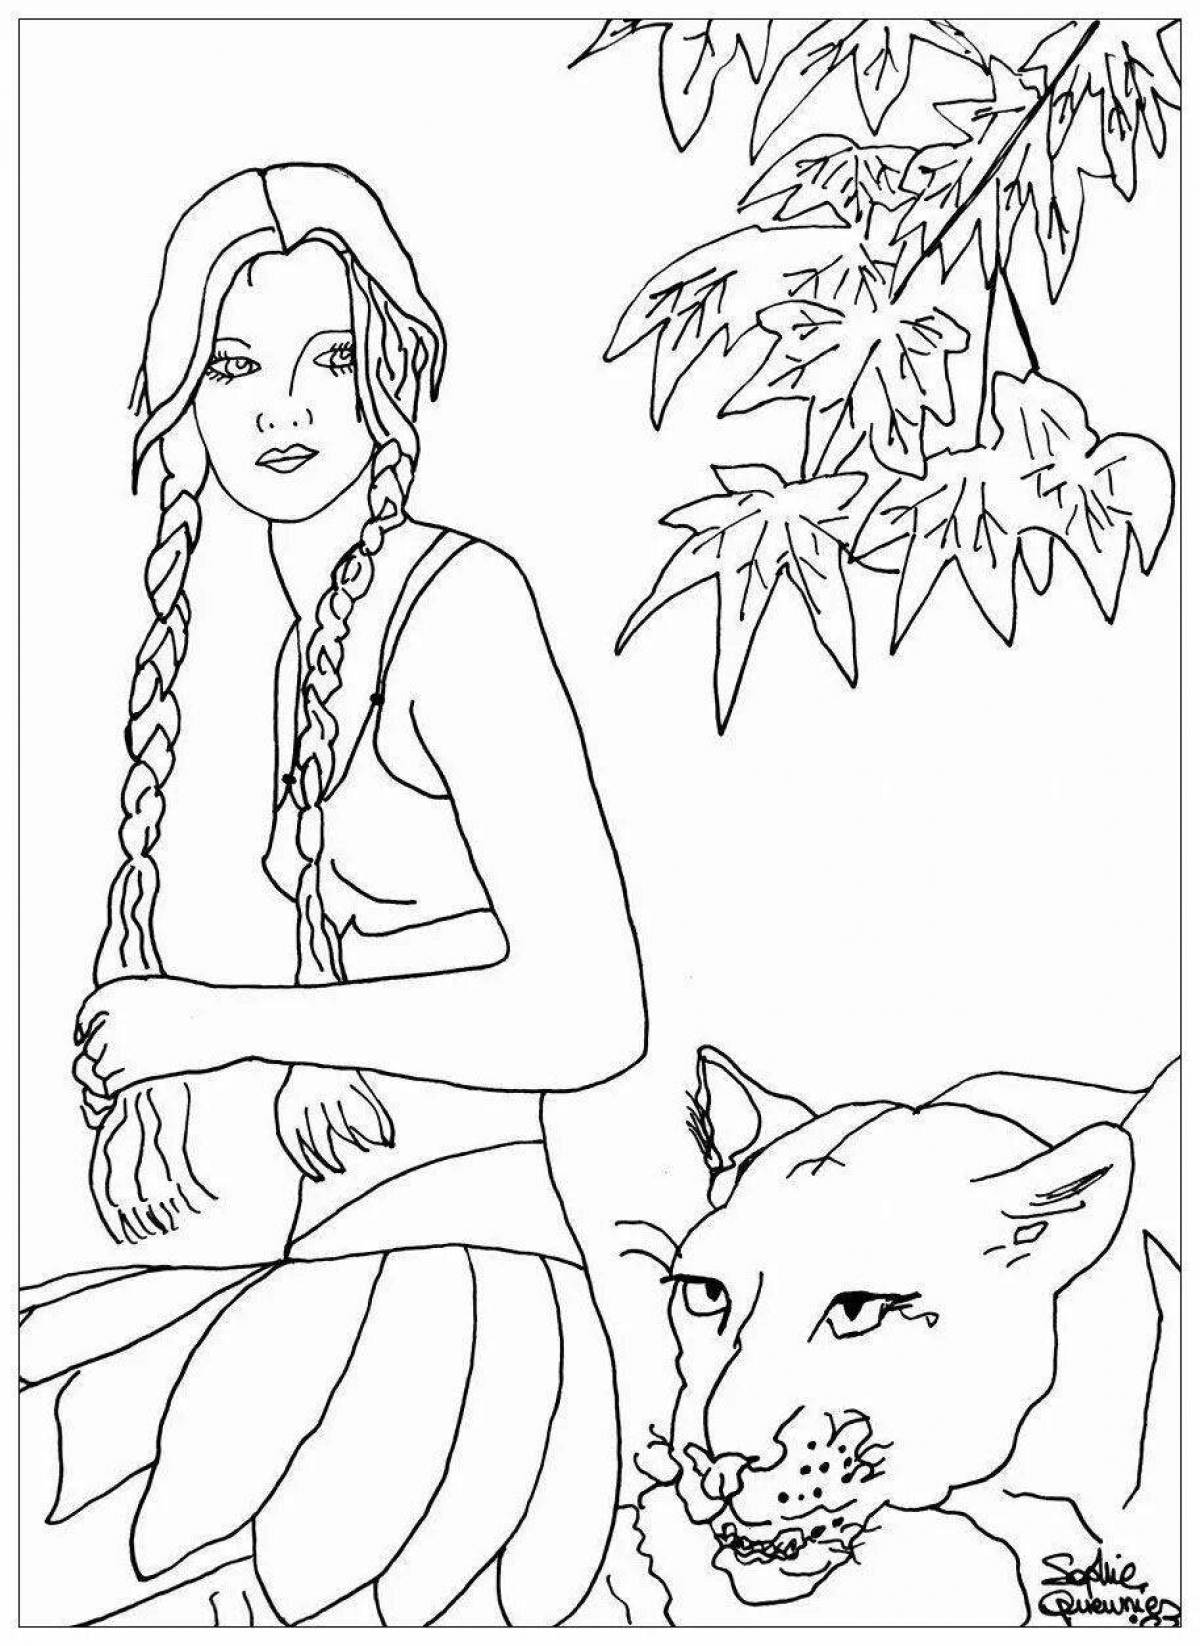 Great woman coloring book